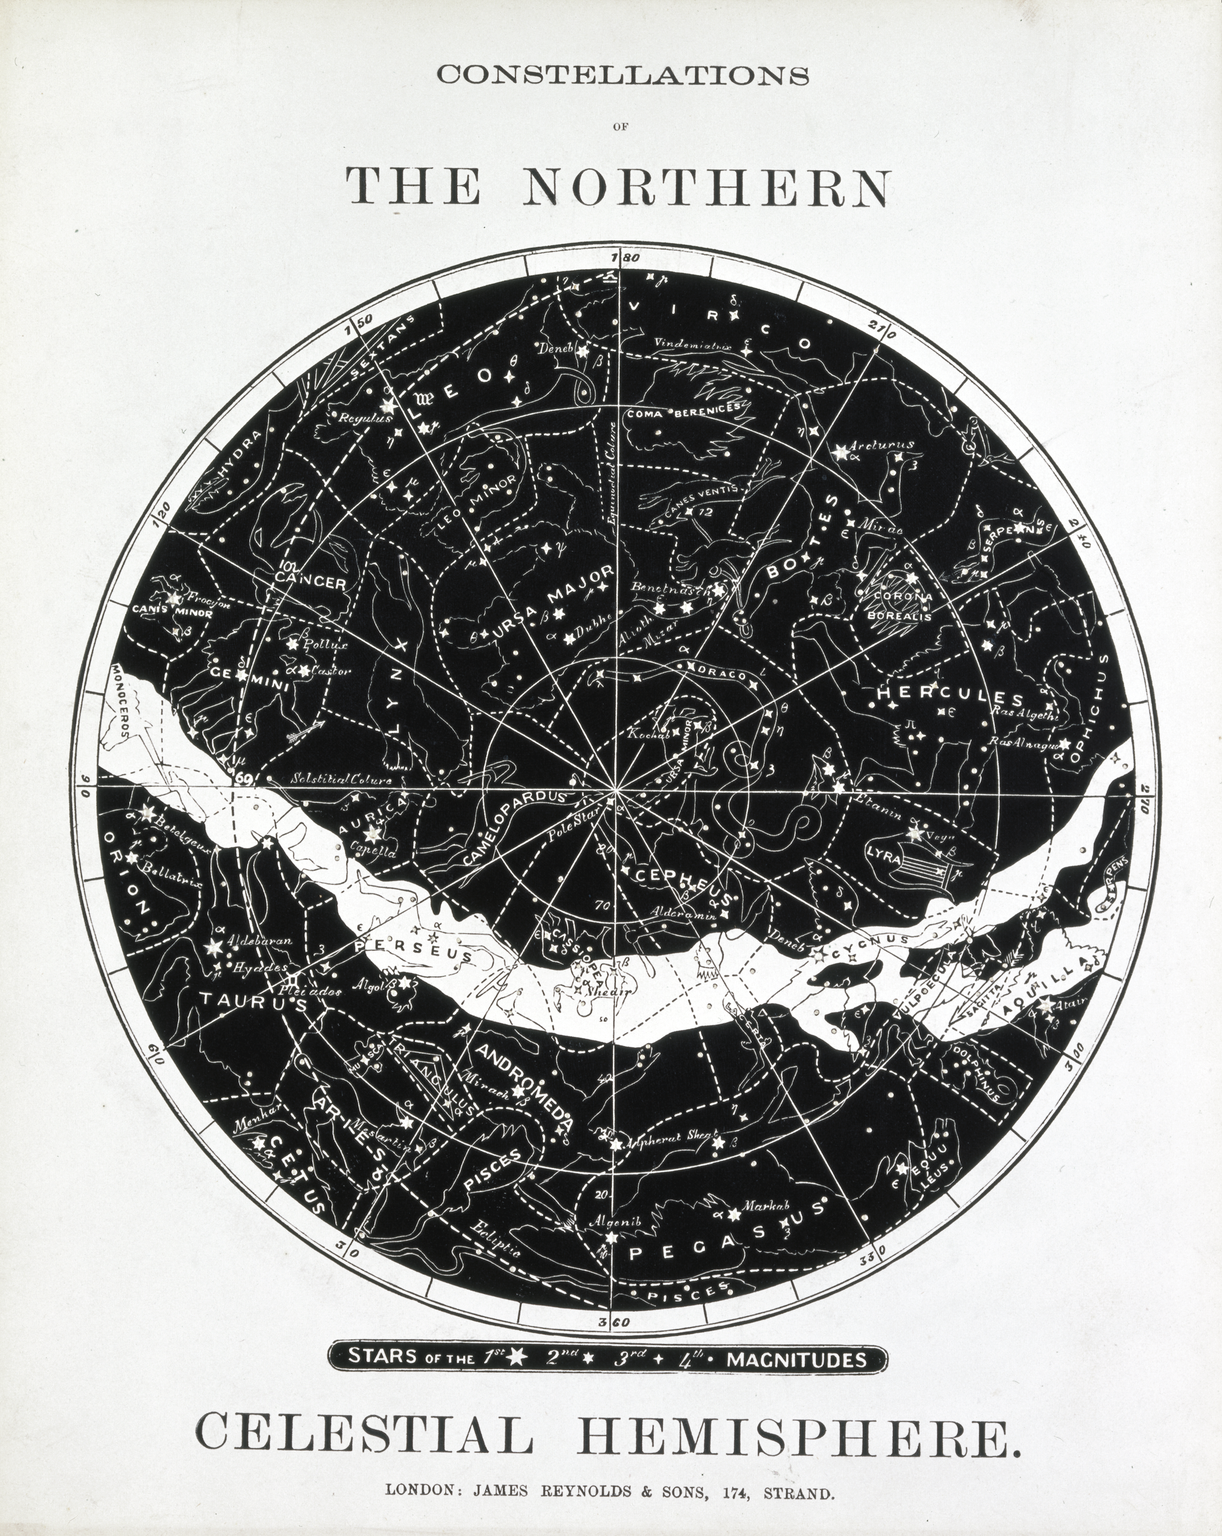 Constellations of the Northern Celestial Hemisphere. ca.1850. Lithograph